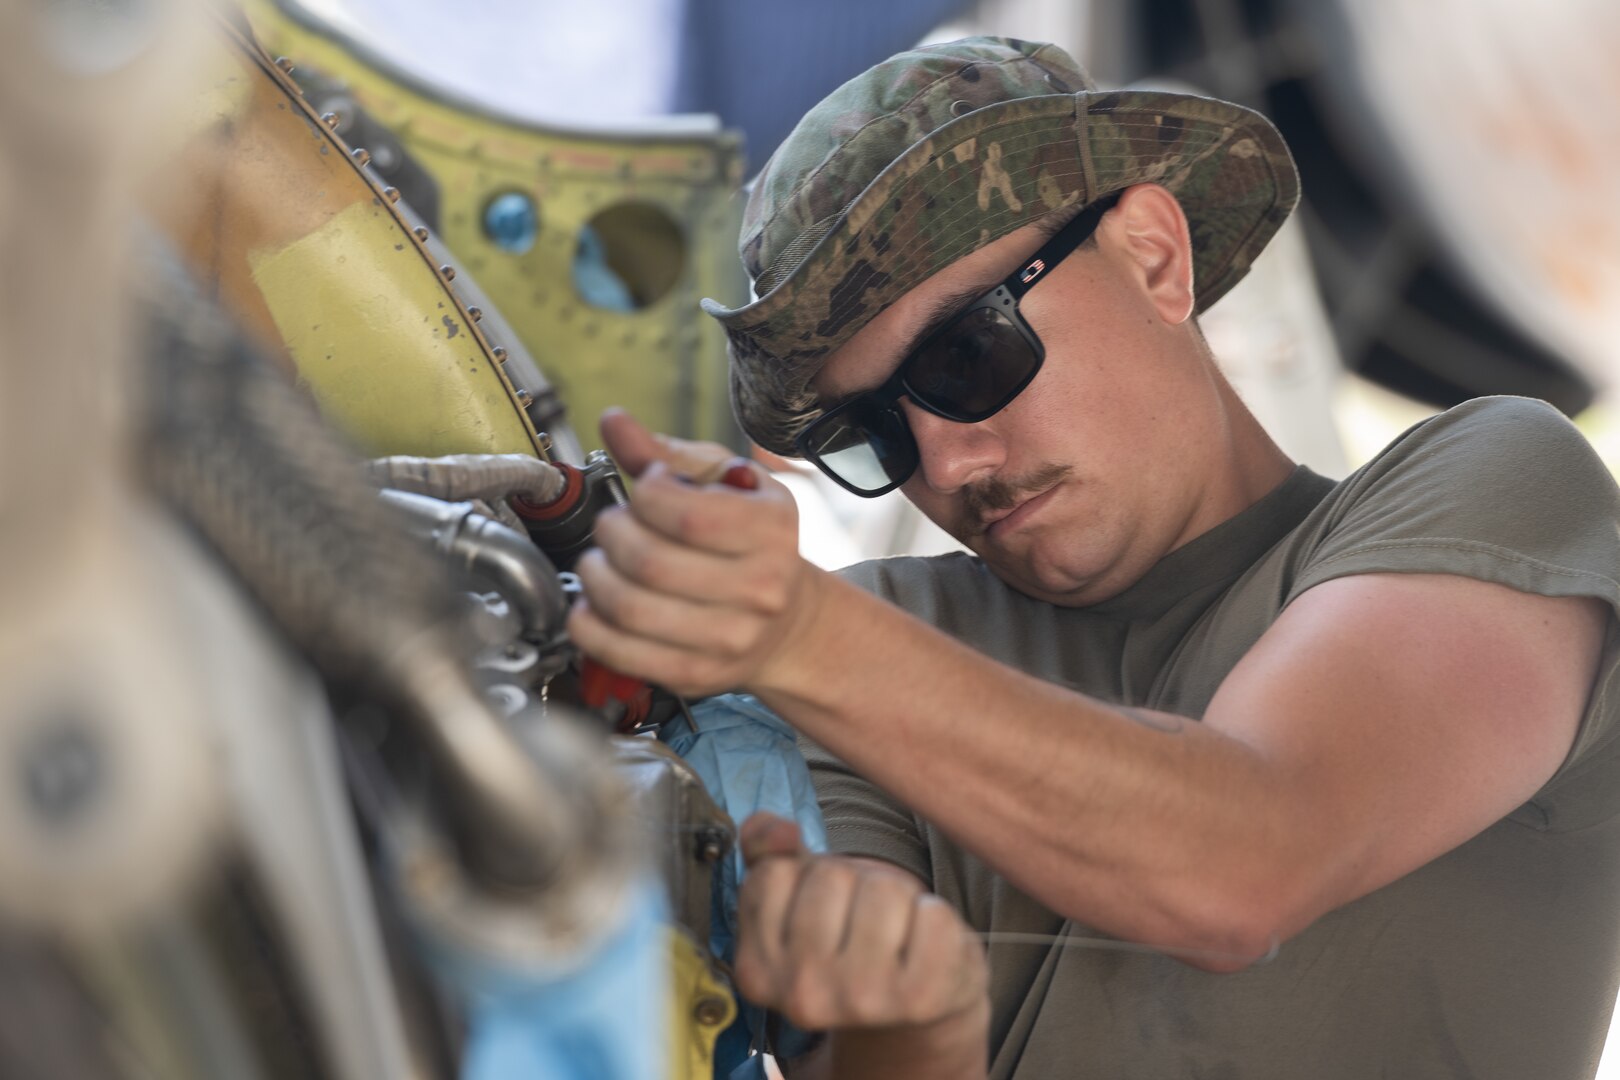 U.S. Air Force Senior Airman Matthew Thibodeau, 5th Aircraft Maintenance Squadron aerospace propulsion technician, replaces an unserviceable constant speed direct oil cooler on a U.S. Air Force B-52H Stratofortress during routine engine maintenance in support of a Bomber Task Force deployment at Andersen Air Force Base, Guam, July 9, 2023. BTF deployments like this enhance the readiness and training necessary to respond to any potential crisis or challenge across the globe. (U.S. Air Force photo by Tech. Sgt. Zade Vadnais)